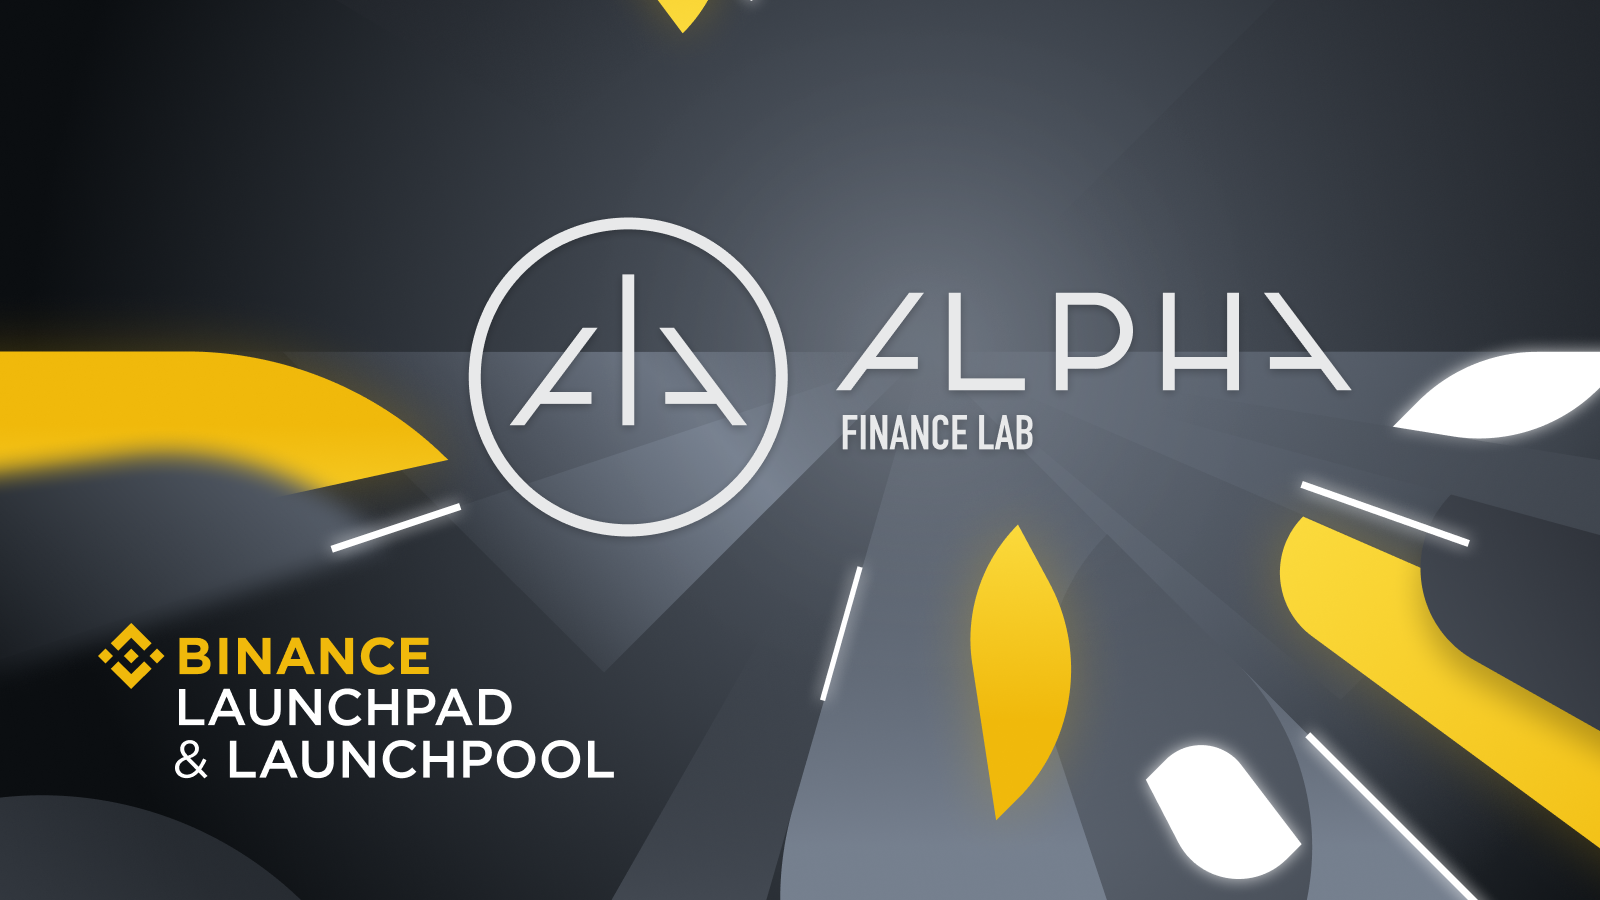 Binance Weekly Report: Two New Launchpool Projects